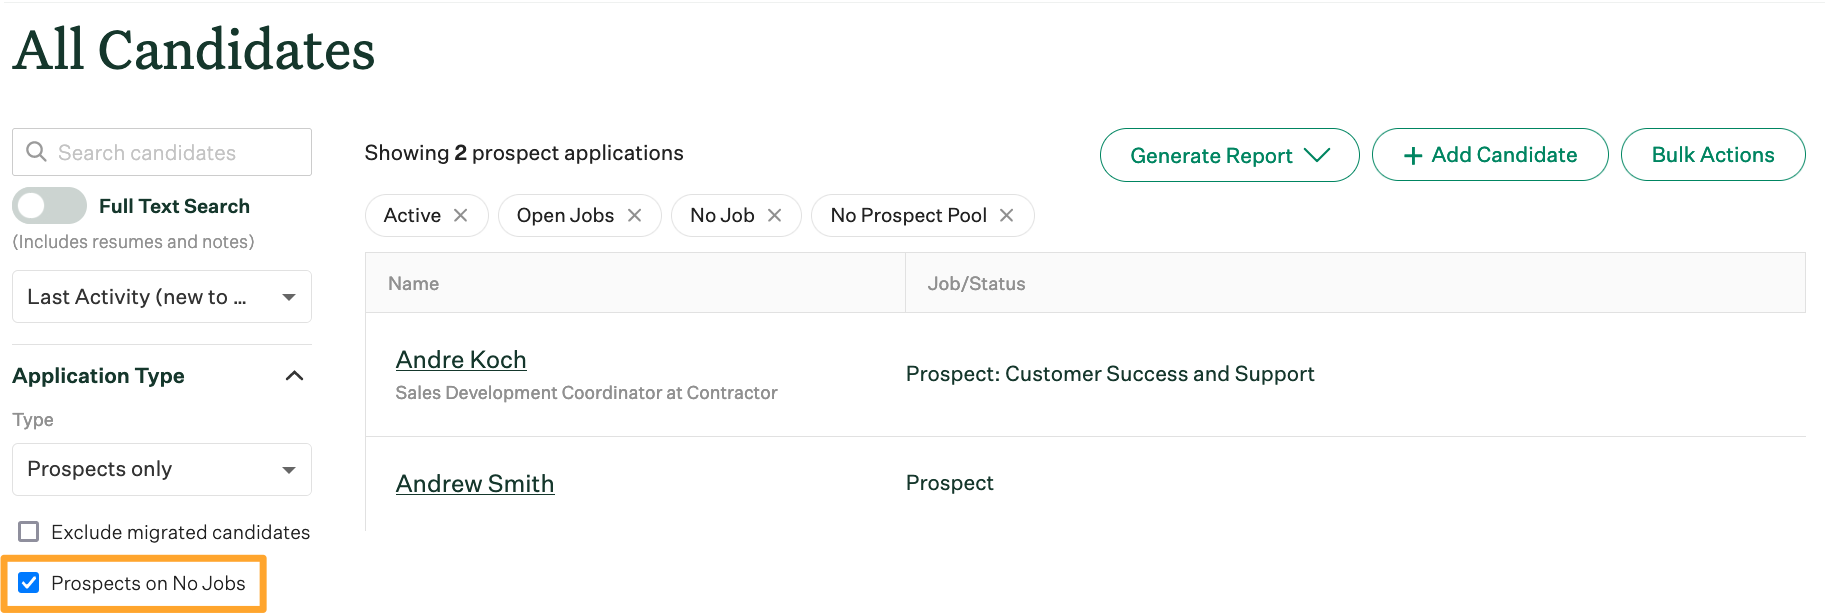 Screenshot-of-prospects-on-no-jobs-checkbox.png